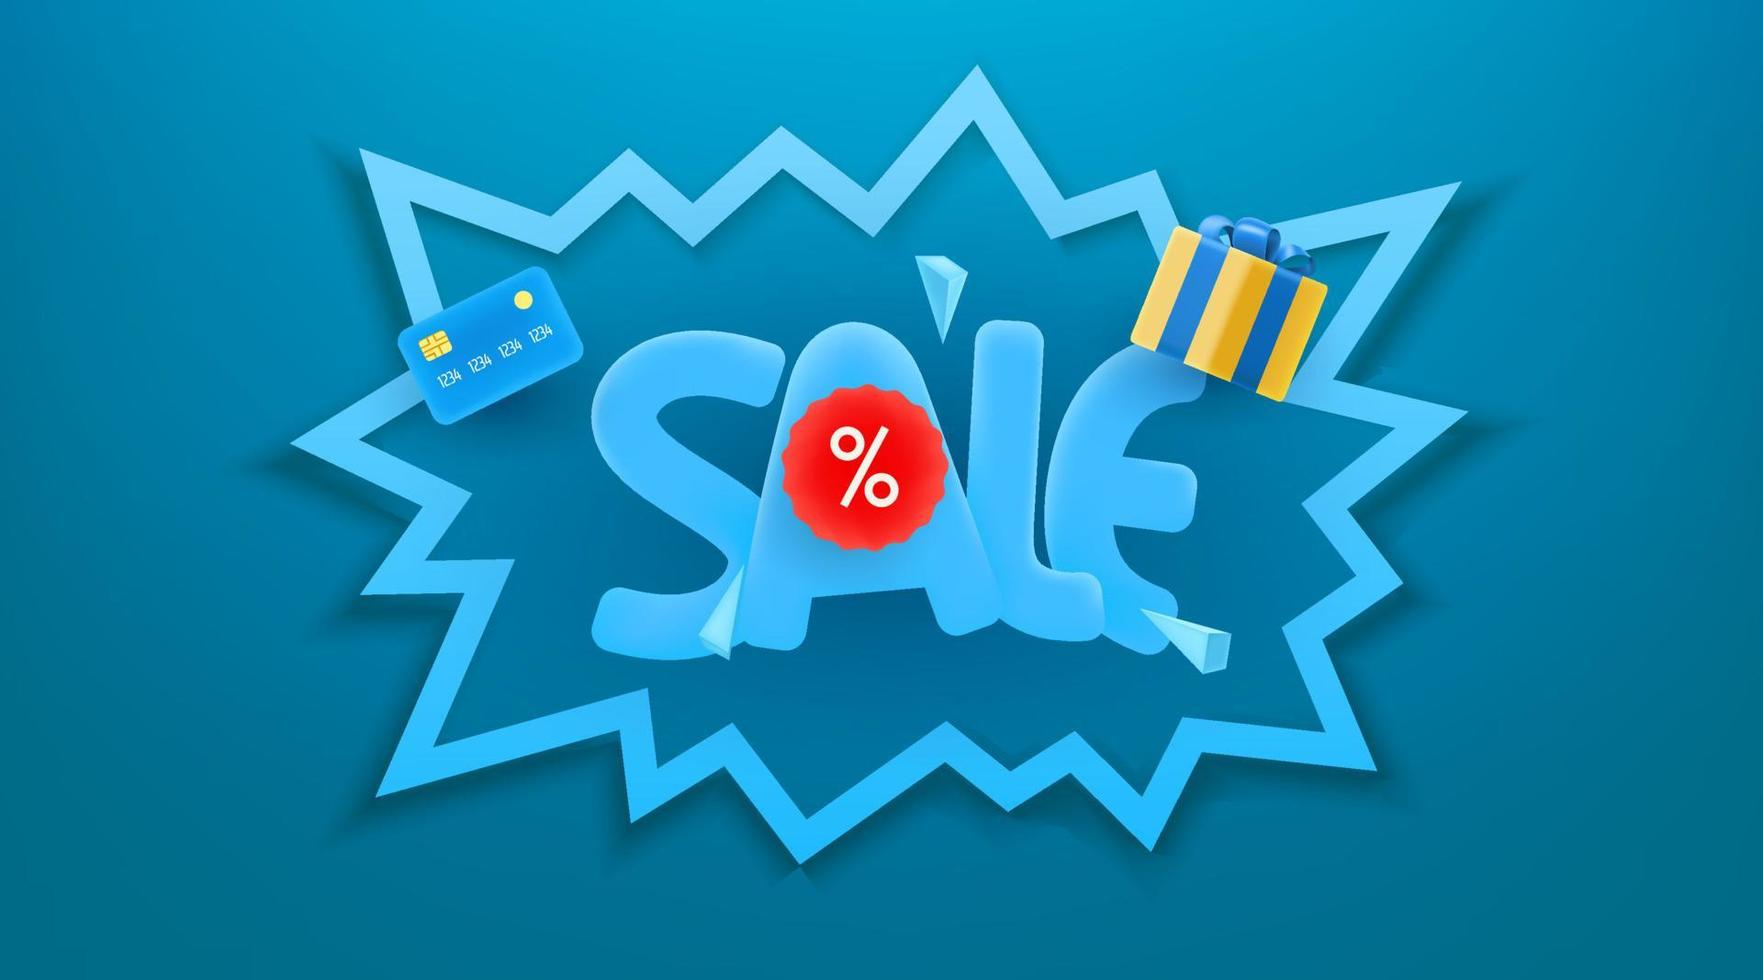 Sale banner with 3d elements. Cute cartoon style vector illustration